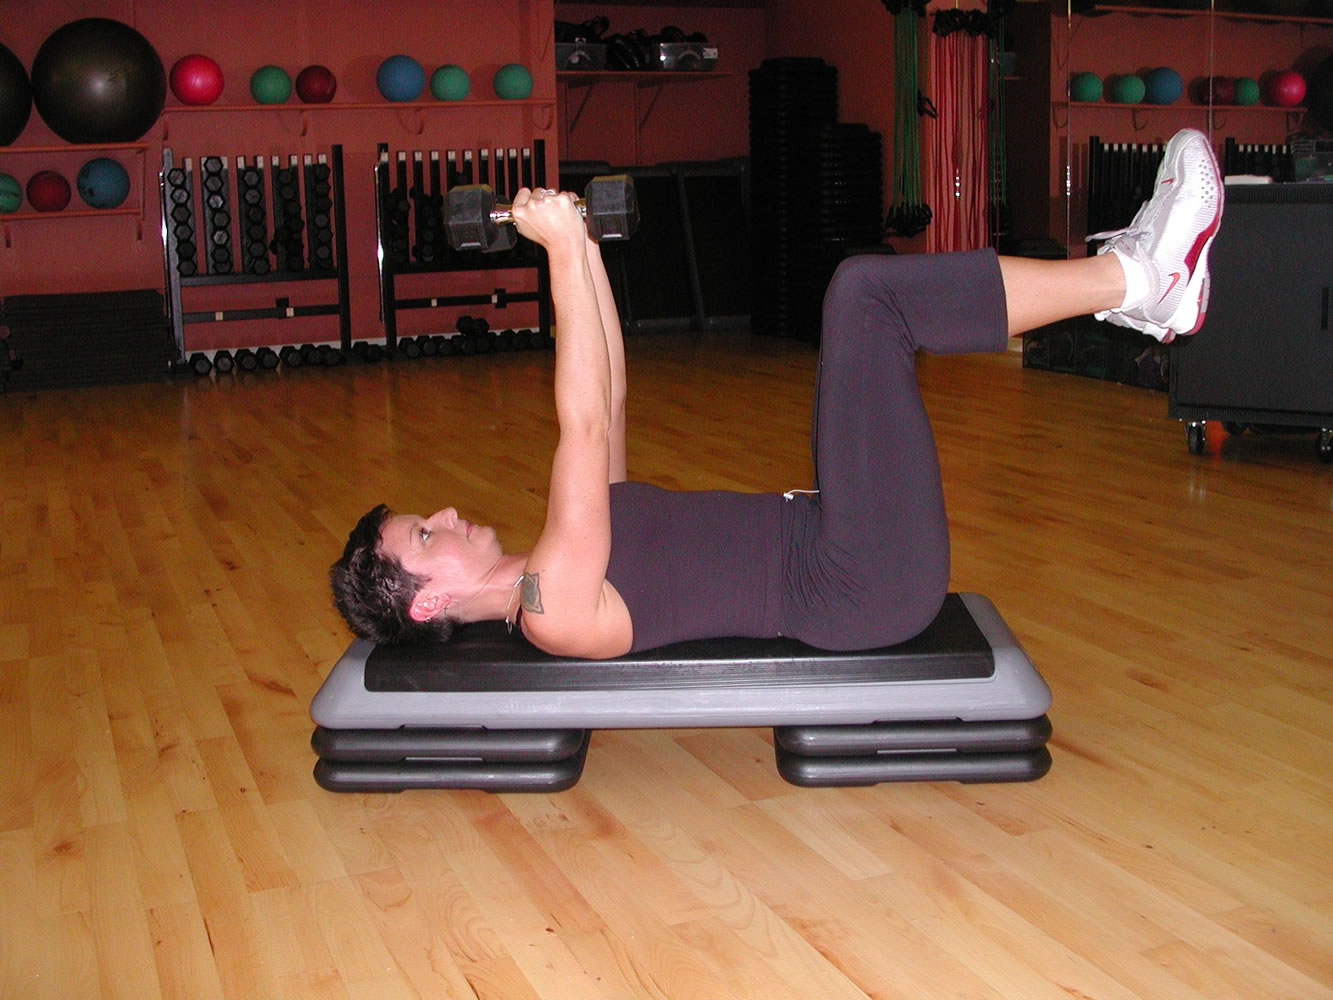 Tricep extension. Lay on your back with feet suspended in the air so that upper thighs are perpendicular to the floor and lower legs are parallel to the floor (90-degree angle at hips and knees). Keep your abdominals pulled inwards throughout the entire exercise and back neutral and completely stable.